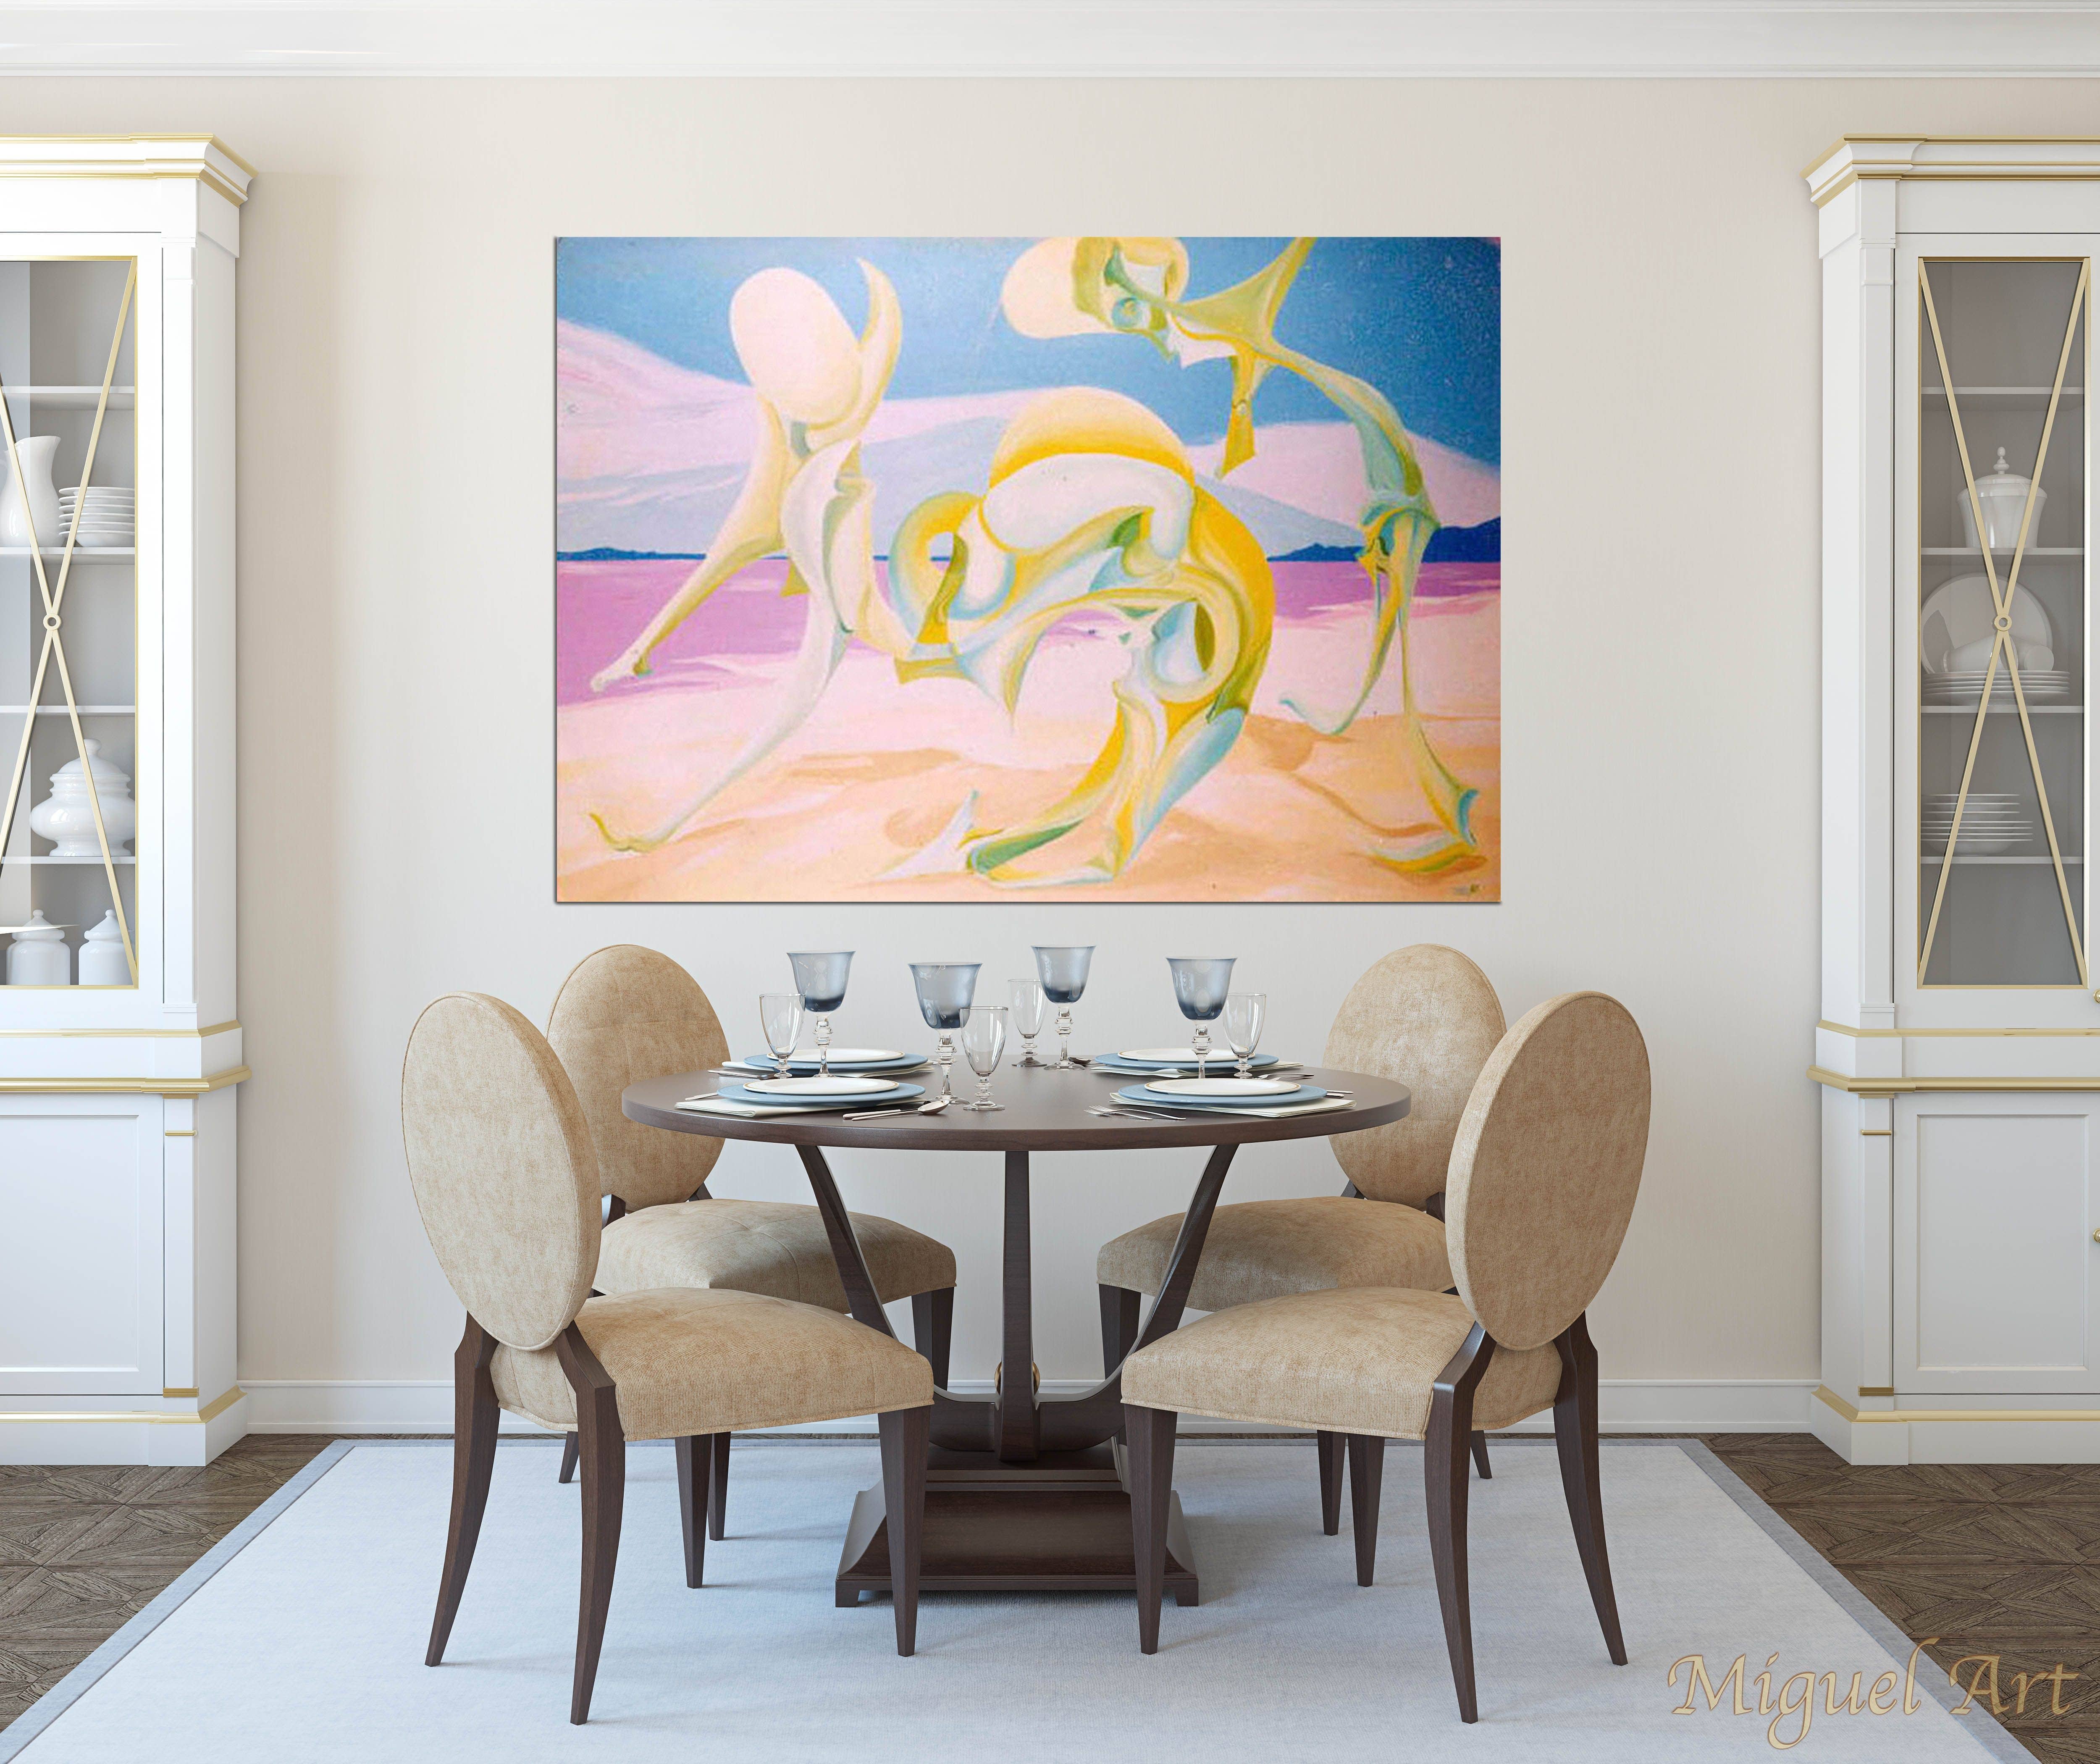 Painting of "Dança Ao Vento" displayed in a dining room on a cream wall